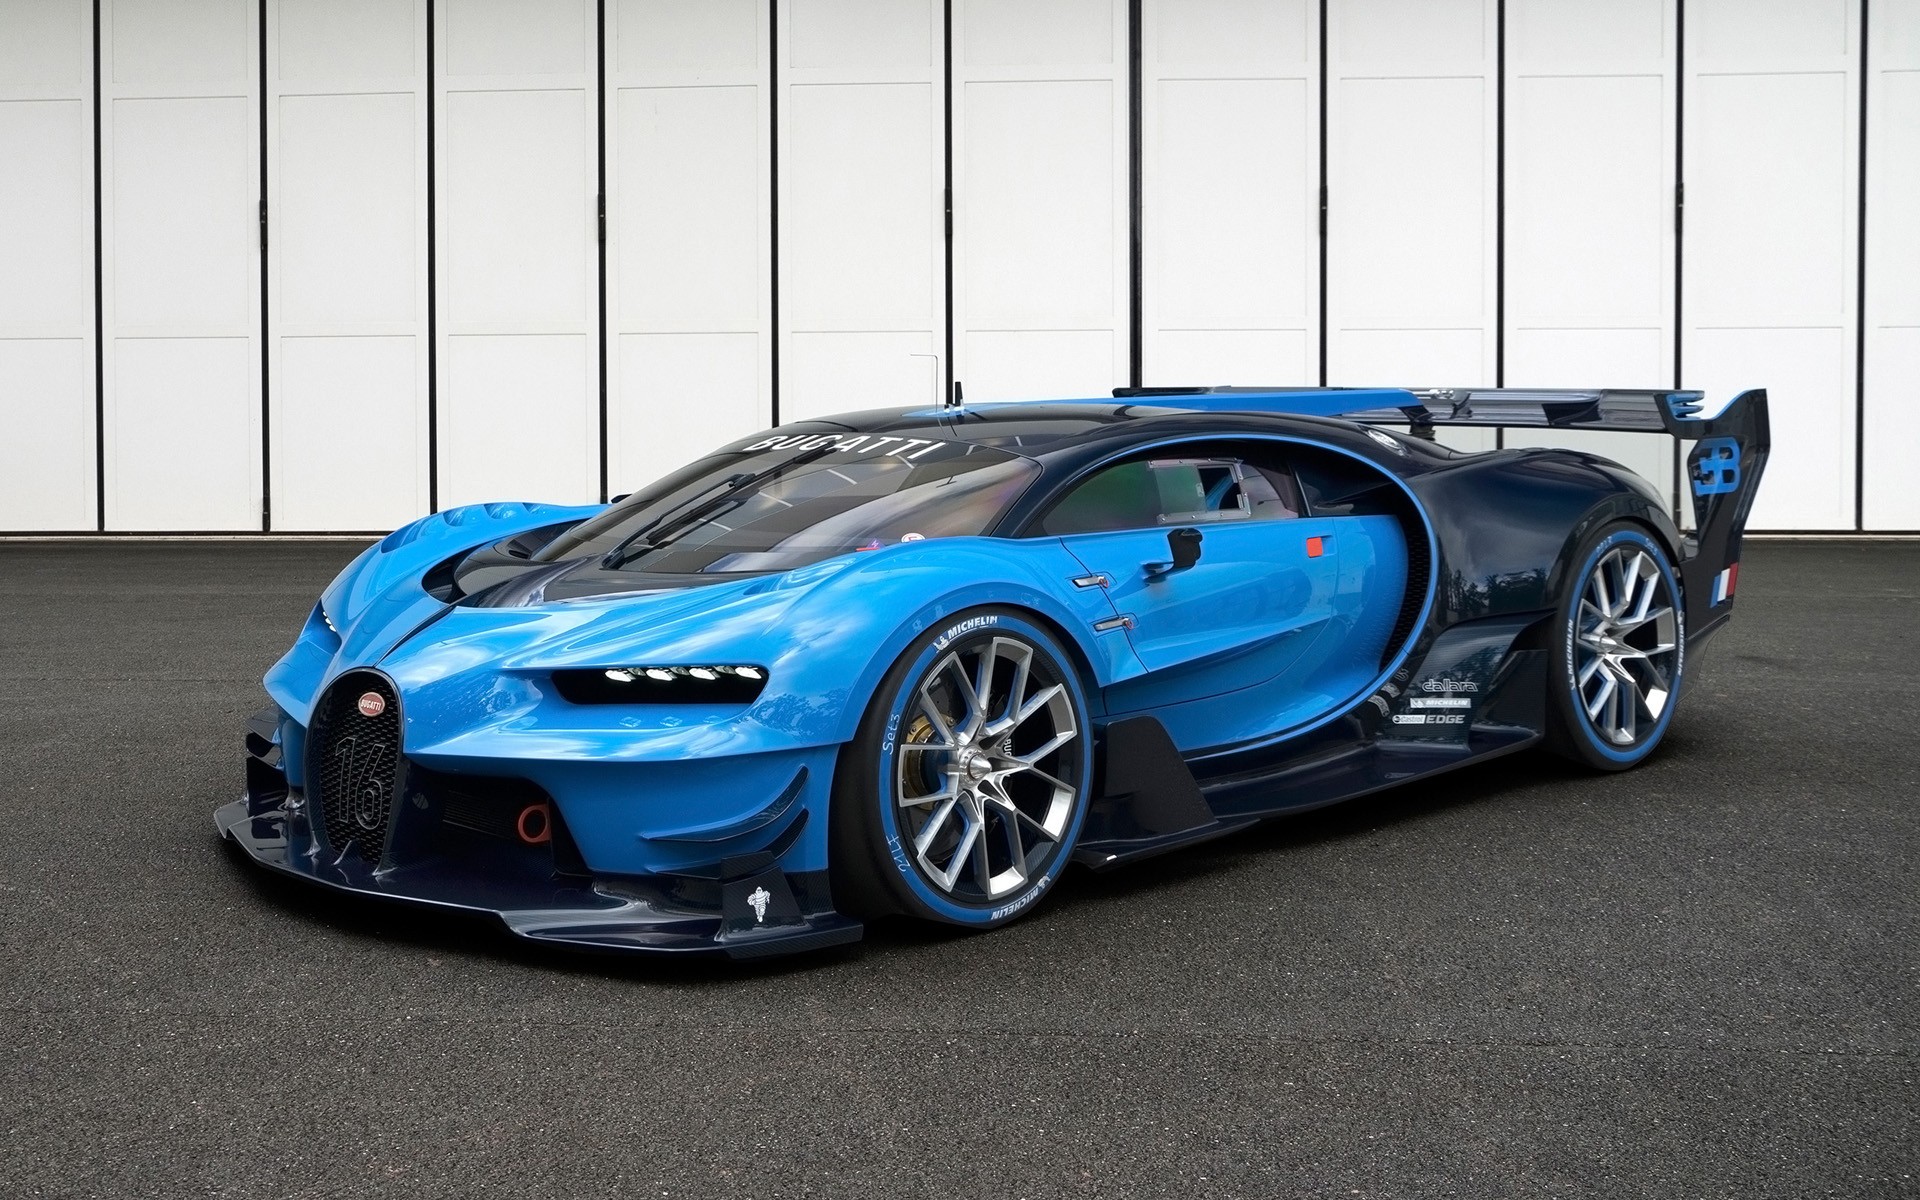 General 1920x1200 Bugatti Veyron car vehicle blue cars Bugatti Vision Gran Turismo Vision Gran Turismo Bugatti Hypercar French Cars Volkswagen Group